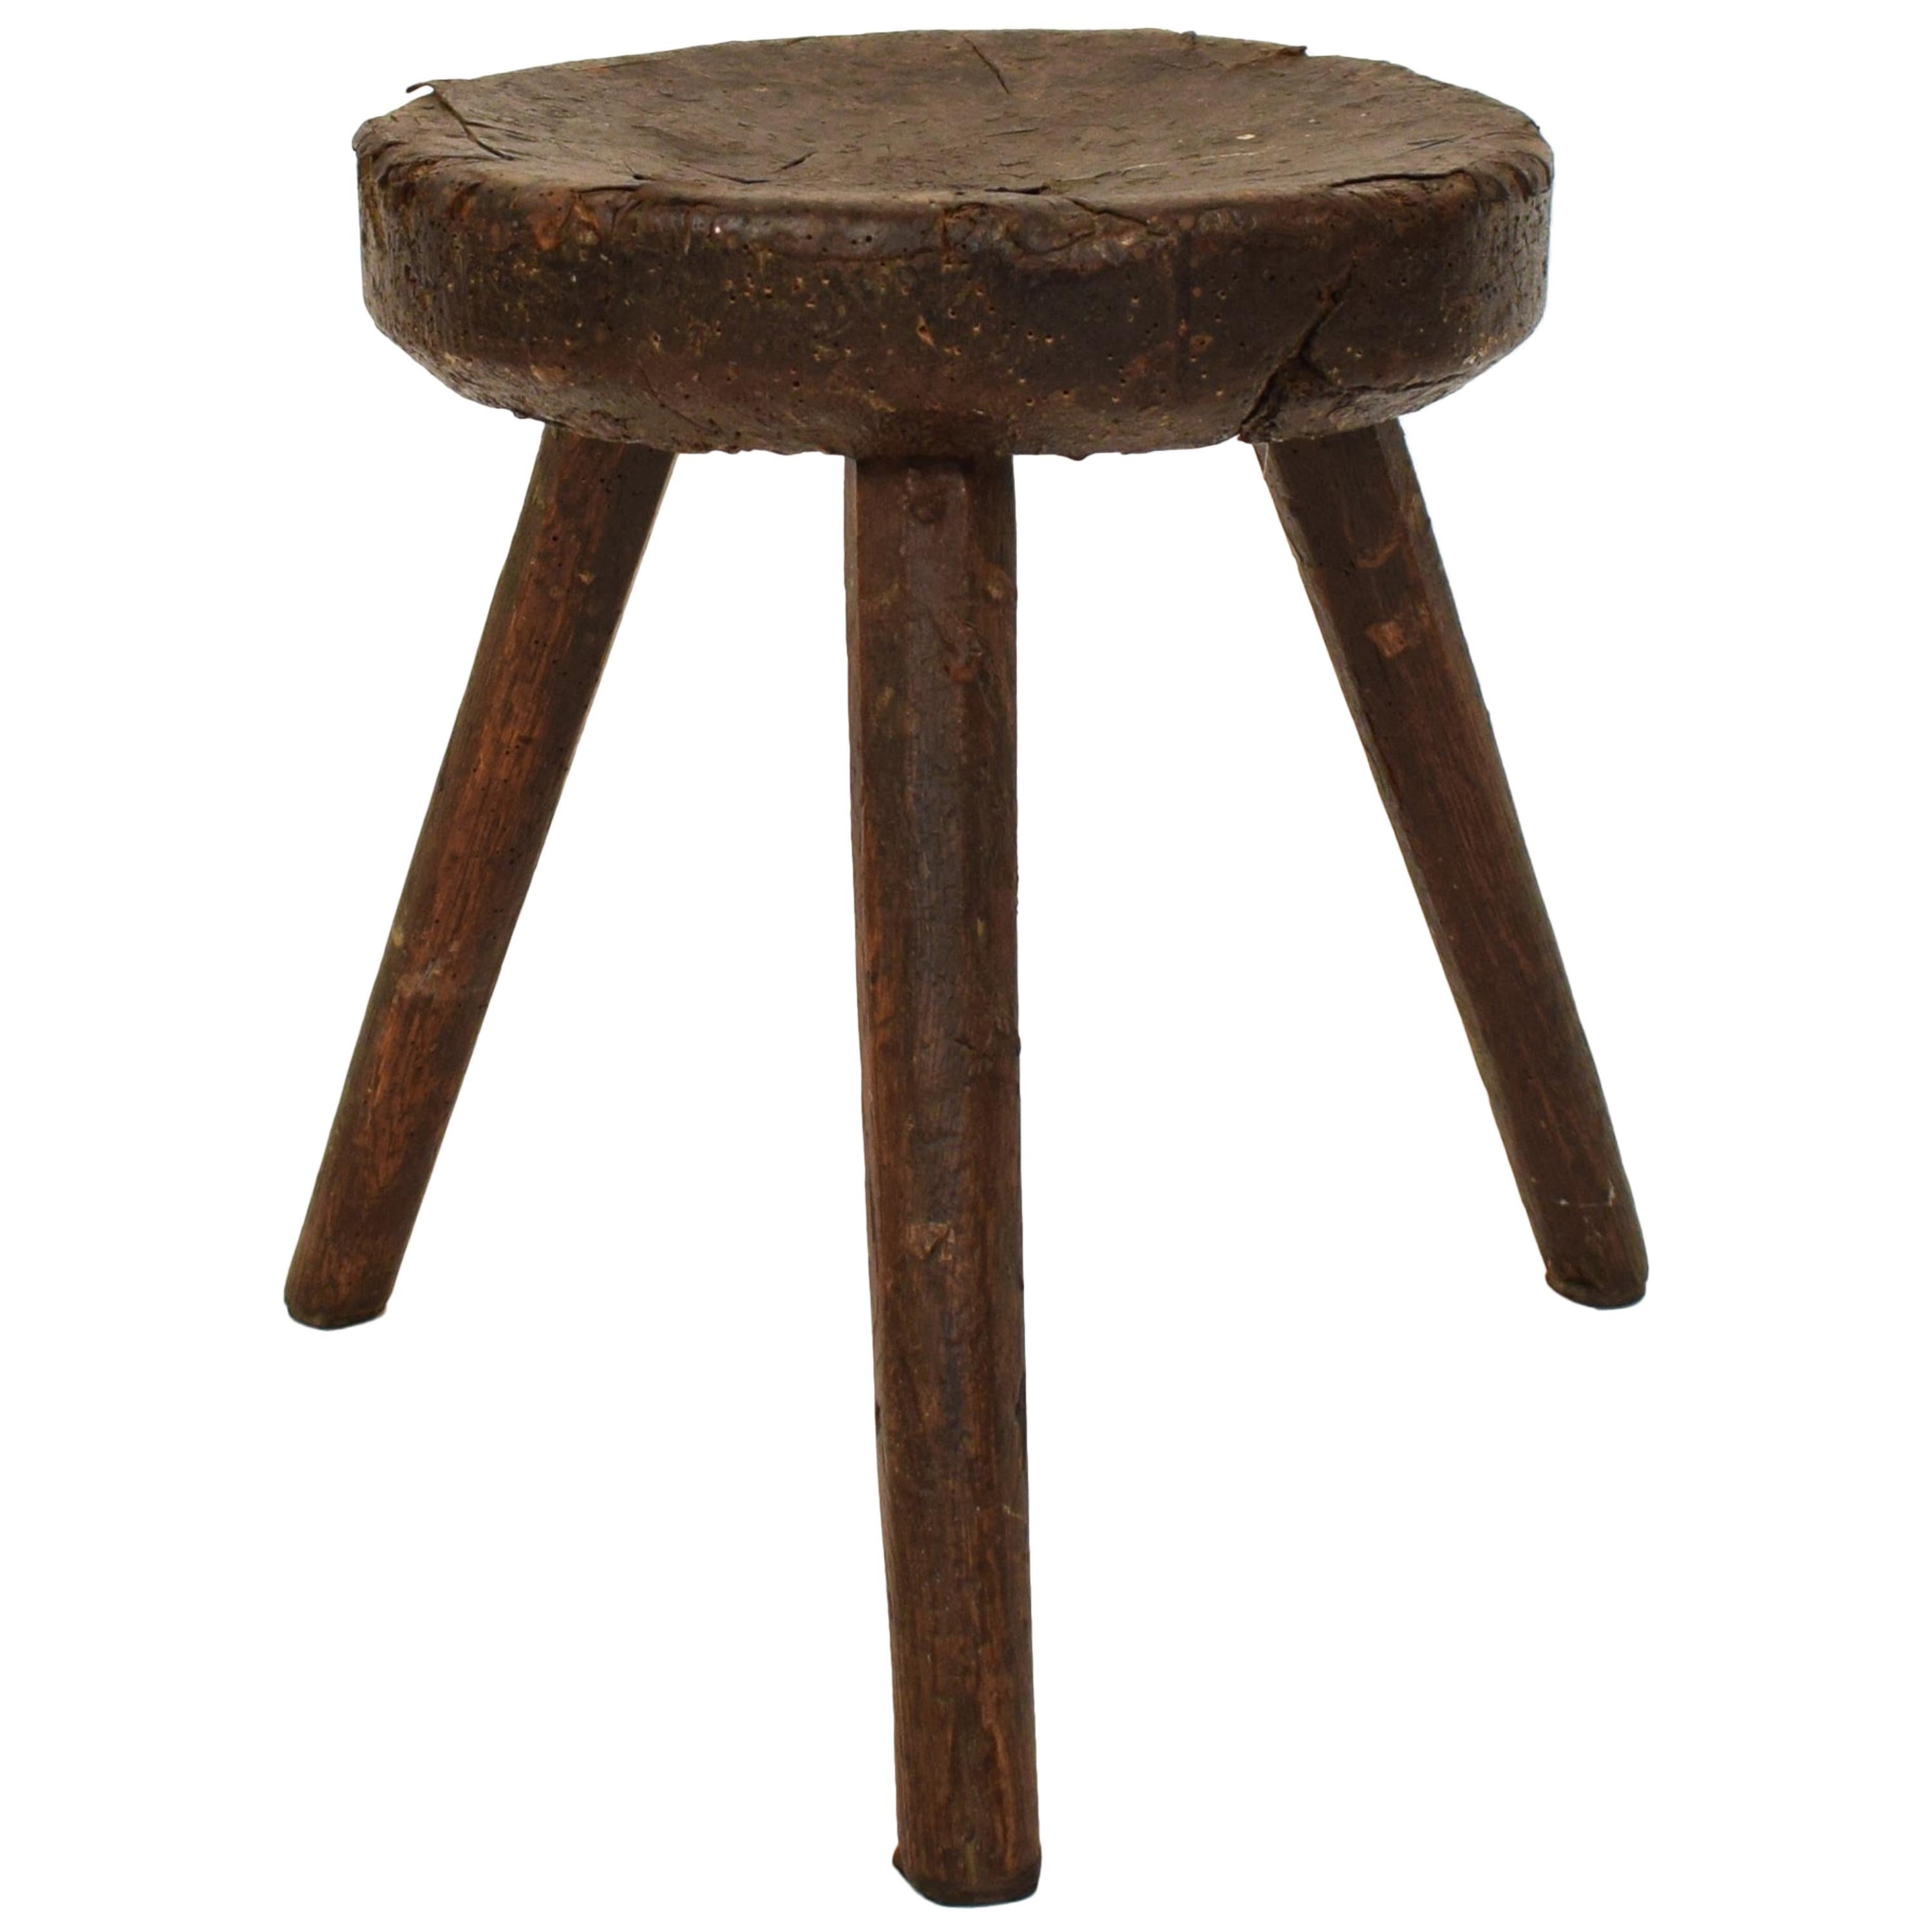 Late 19th Century Primitive Elm Country Splayed Leg Wood Stool